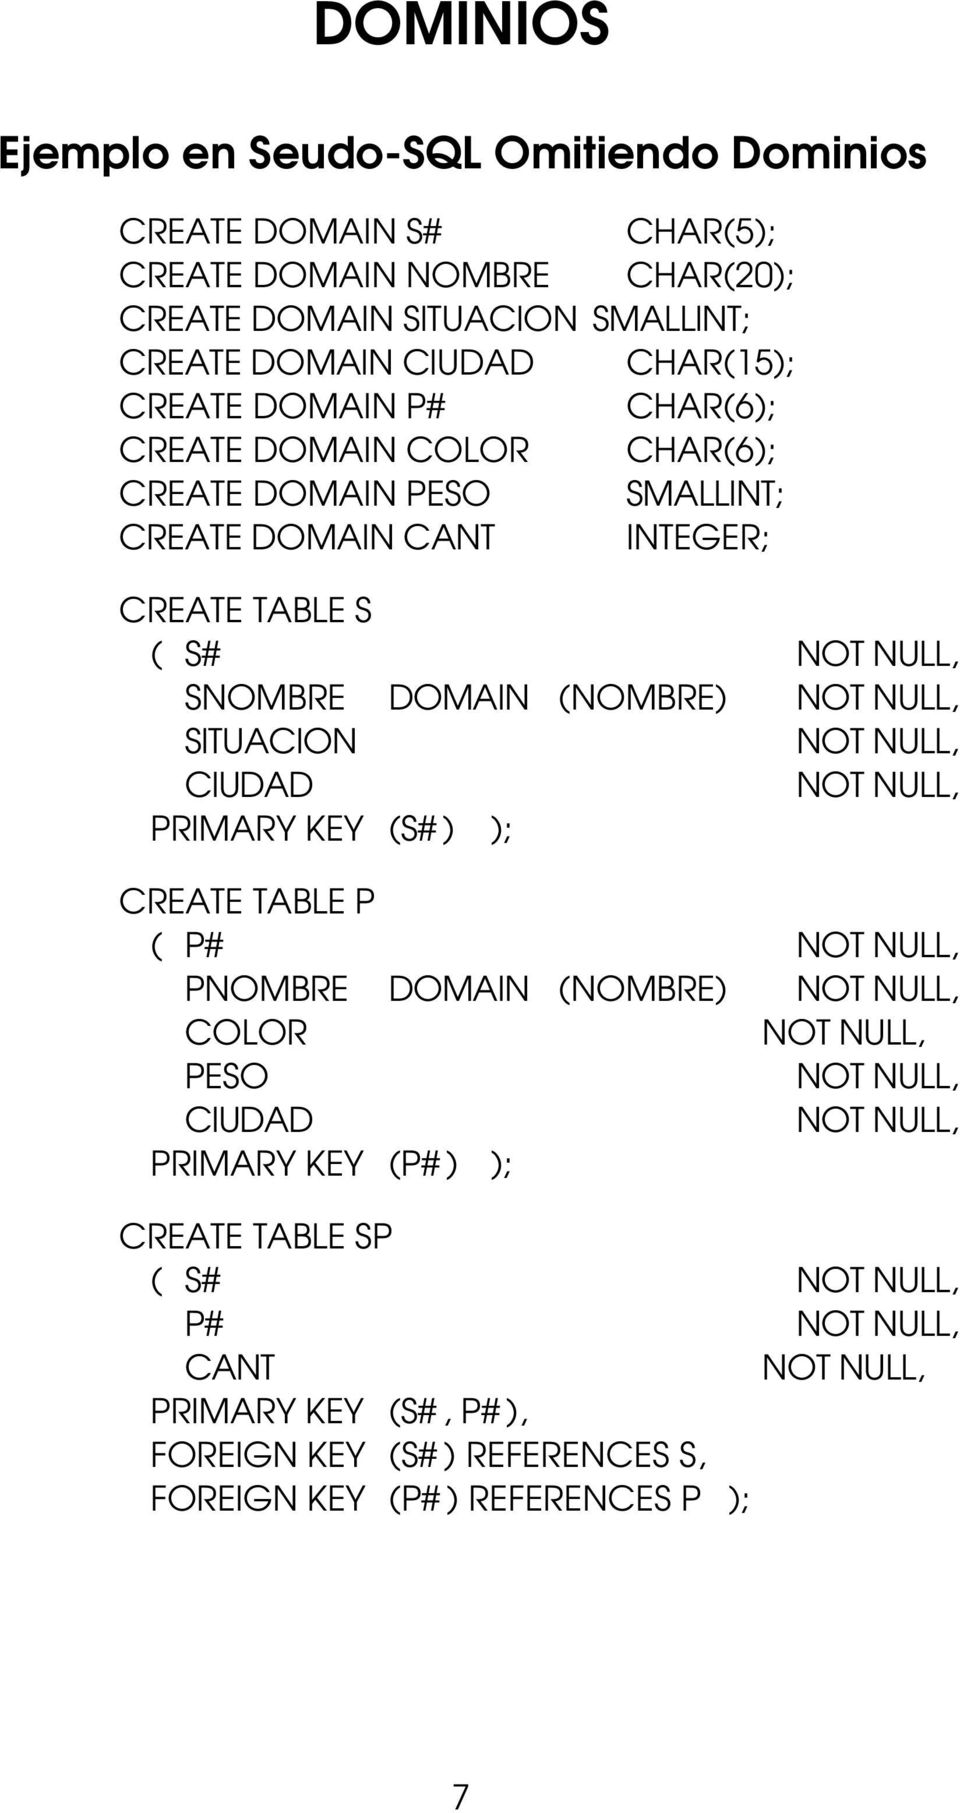 NULL, SITUACION NOT NULL, CIUDAD NOT NULL, PRIMARY KEY (S#) ); CREATE TABLE P ( P# NOT NULL, PNOMBRE DOMAIN (NOMBRE) NOT NULL, COLOR NOT NULL, PESO NOT NULL, CIUDAD NOT